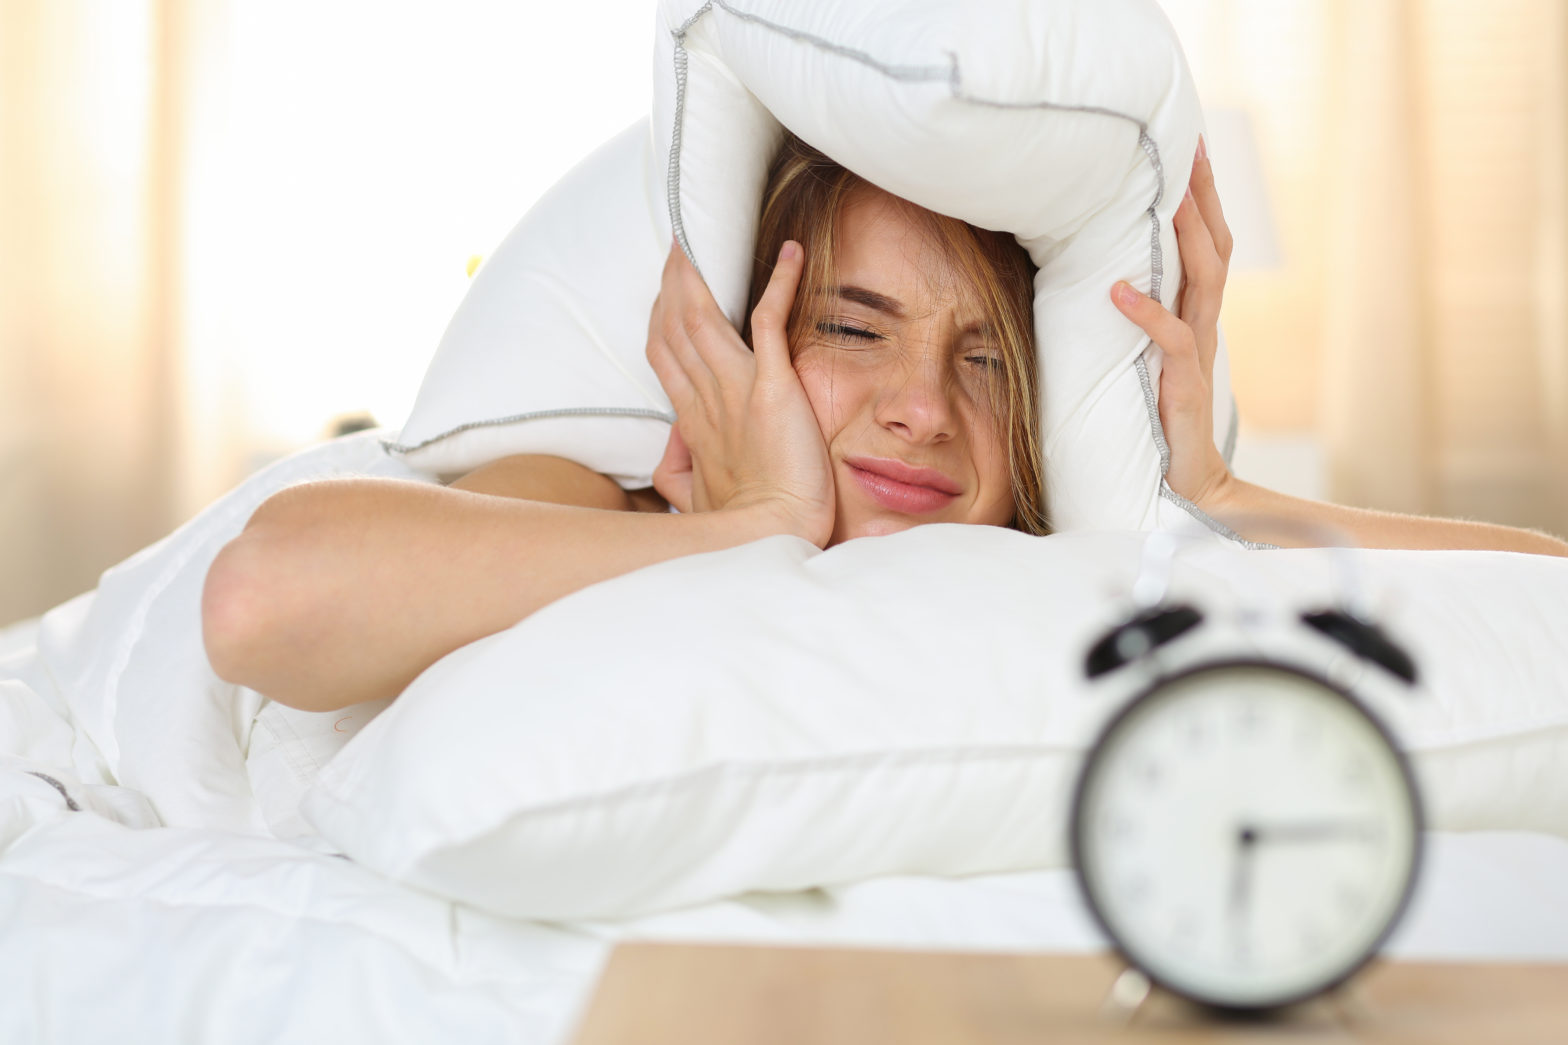 5 Health Issues That Can Stem From Not Getting Enough Sleep